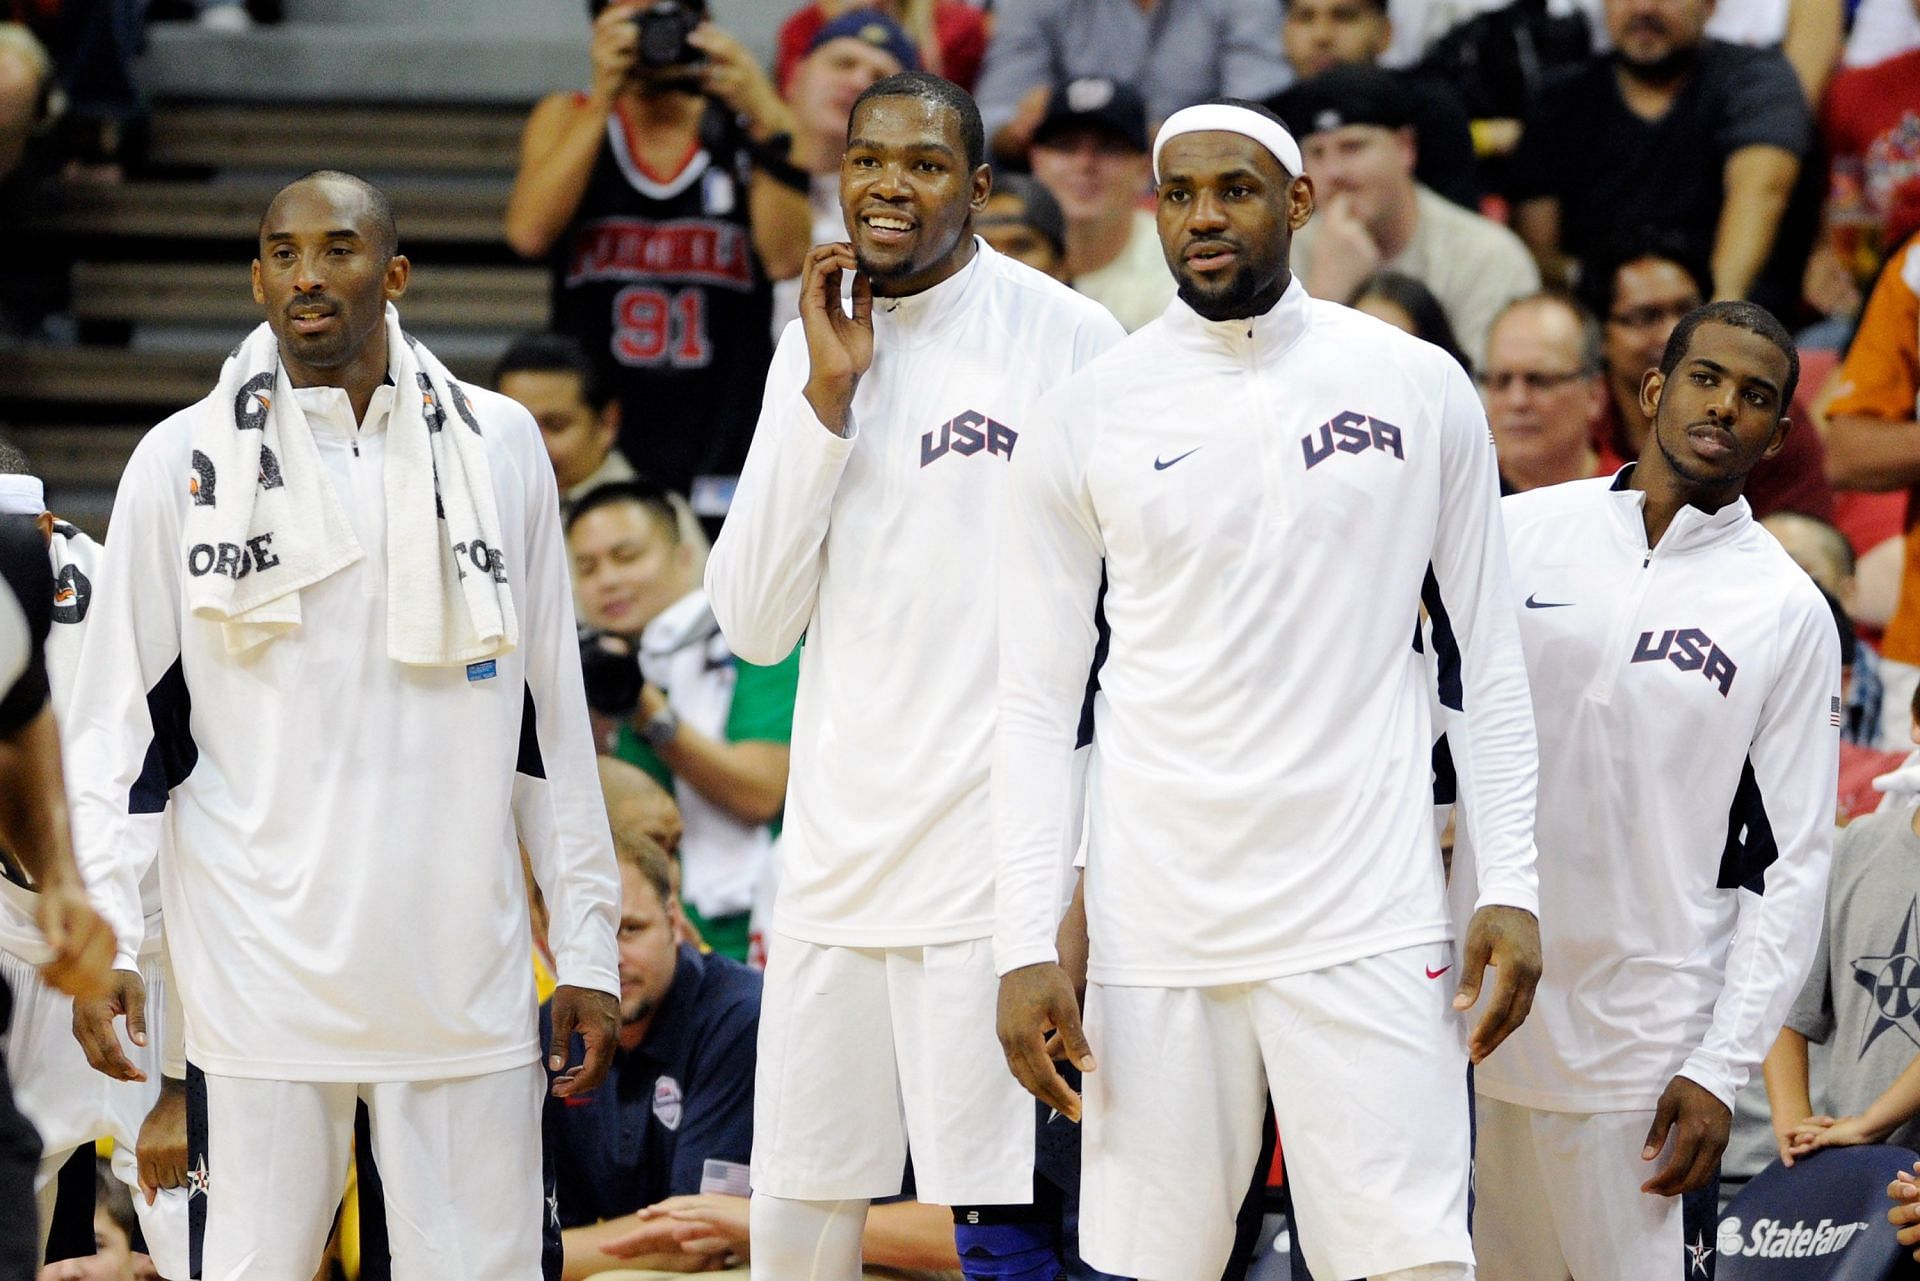 LeBron James teamed up alongside Kevin Durant and Kobe Bryant as part of the USA Olympic team, while he teamed up with Kyrie Irving as part of the Cleveland Cavaliers